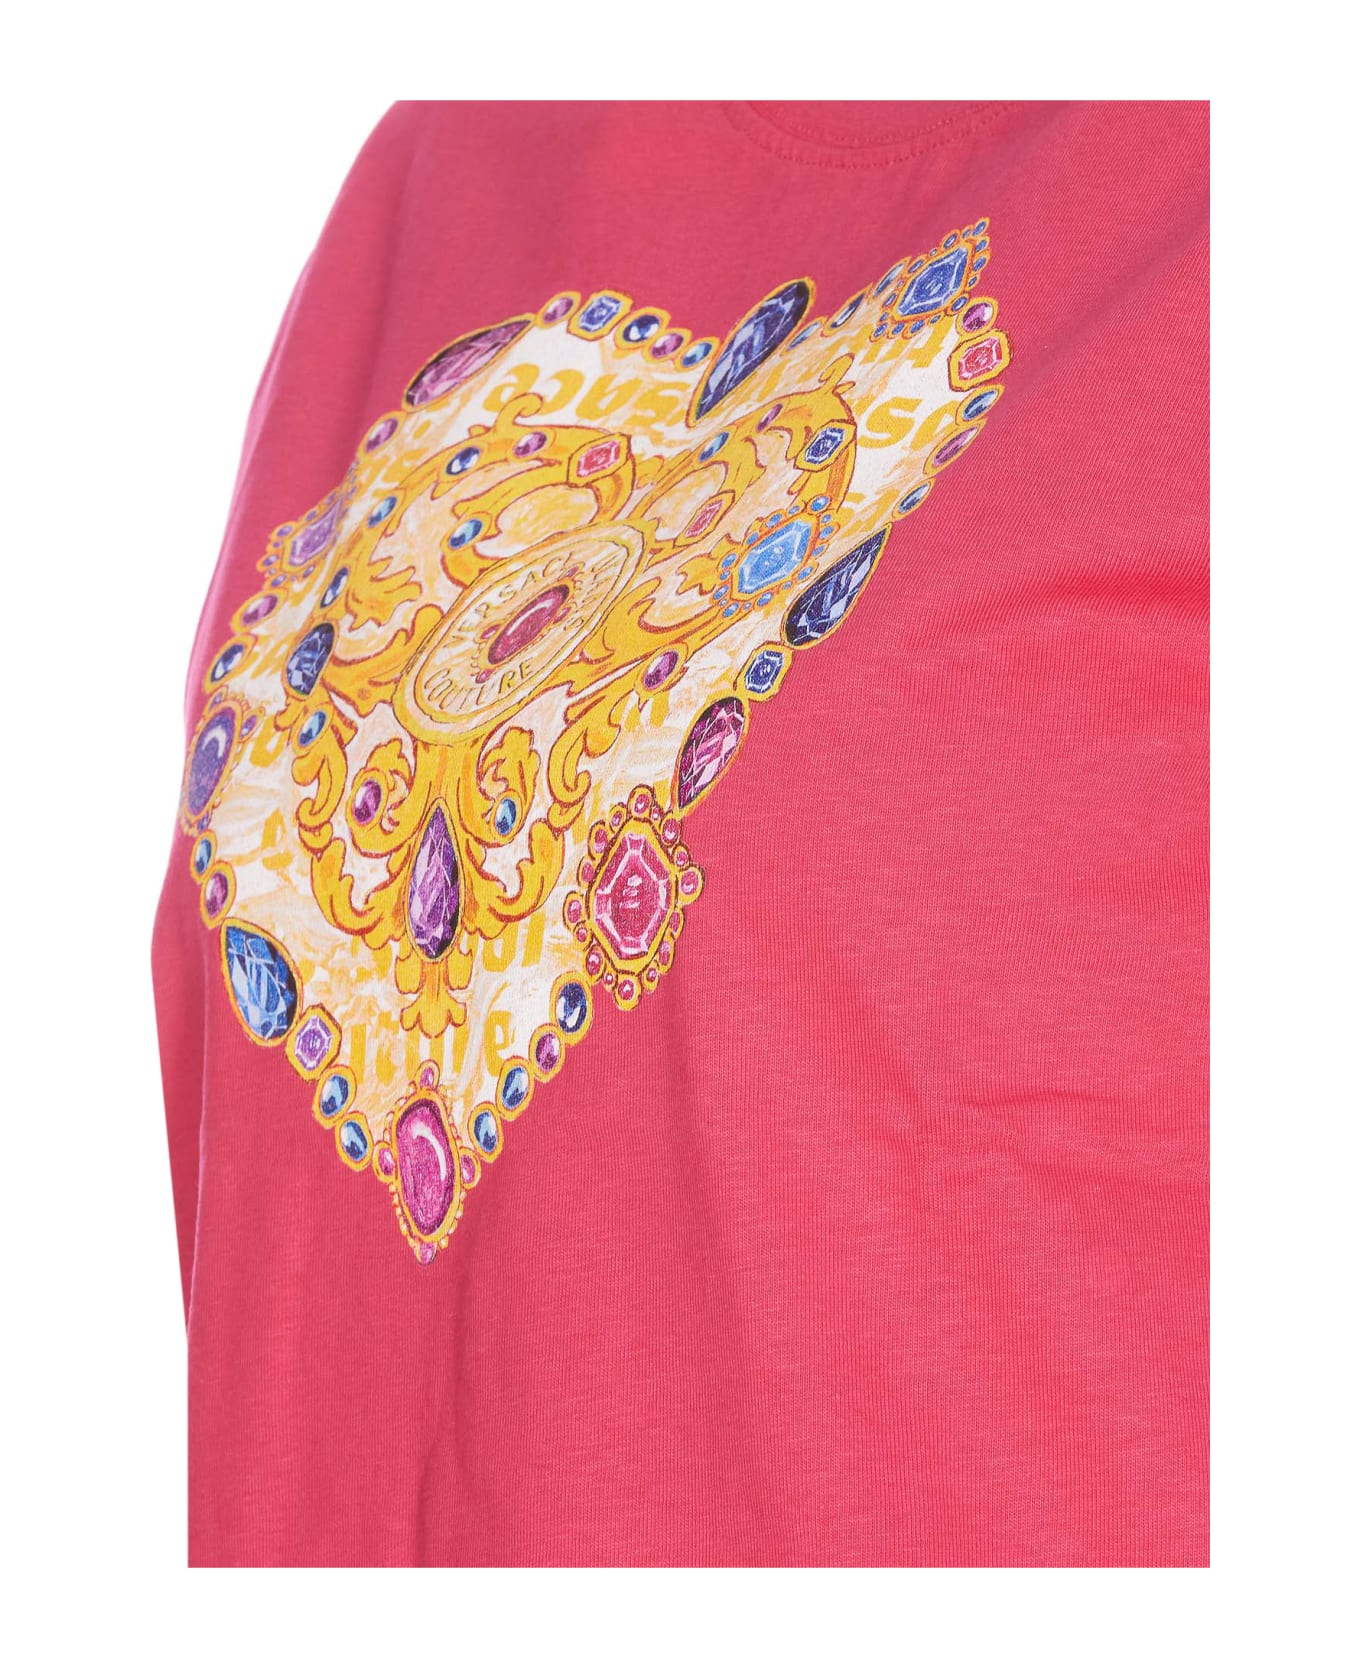 Versace Jeans Couture Heart Couture T-shirt - Fuchsia